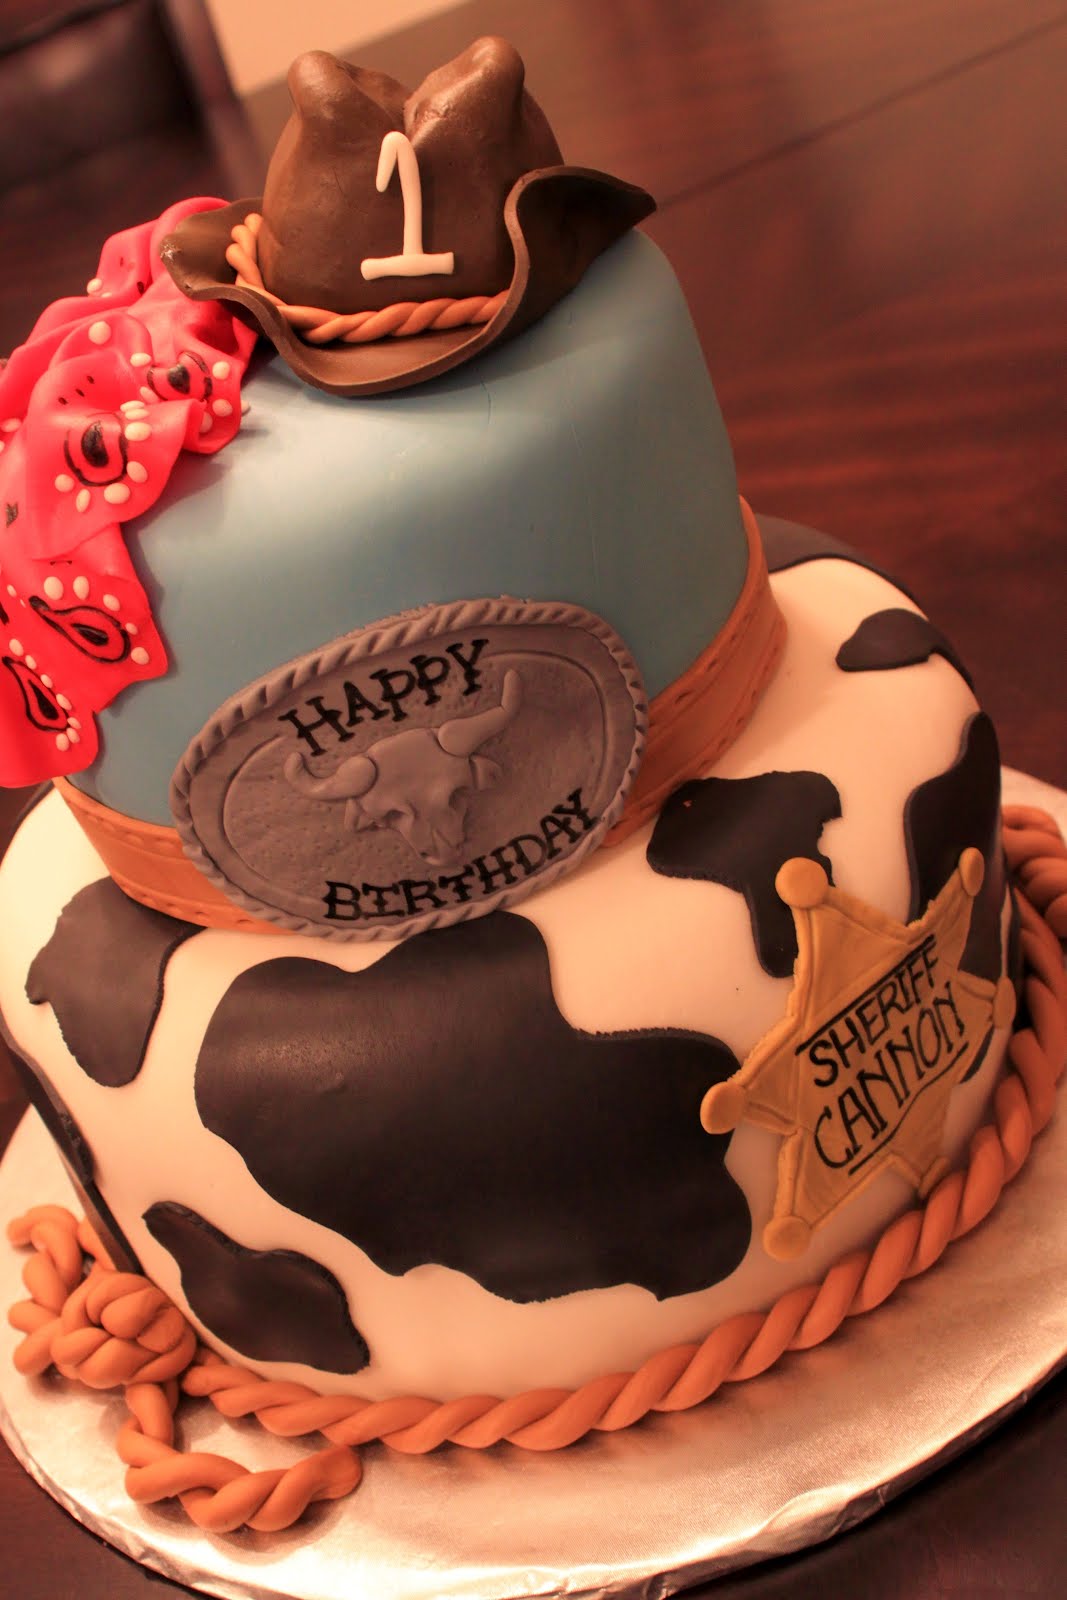 Layers of Love: Sheriff Cannon Cowboy cake